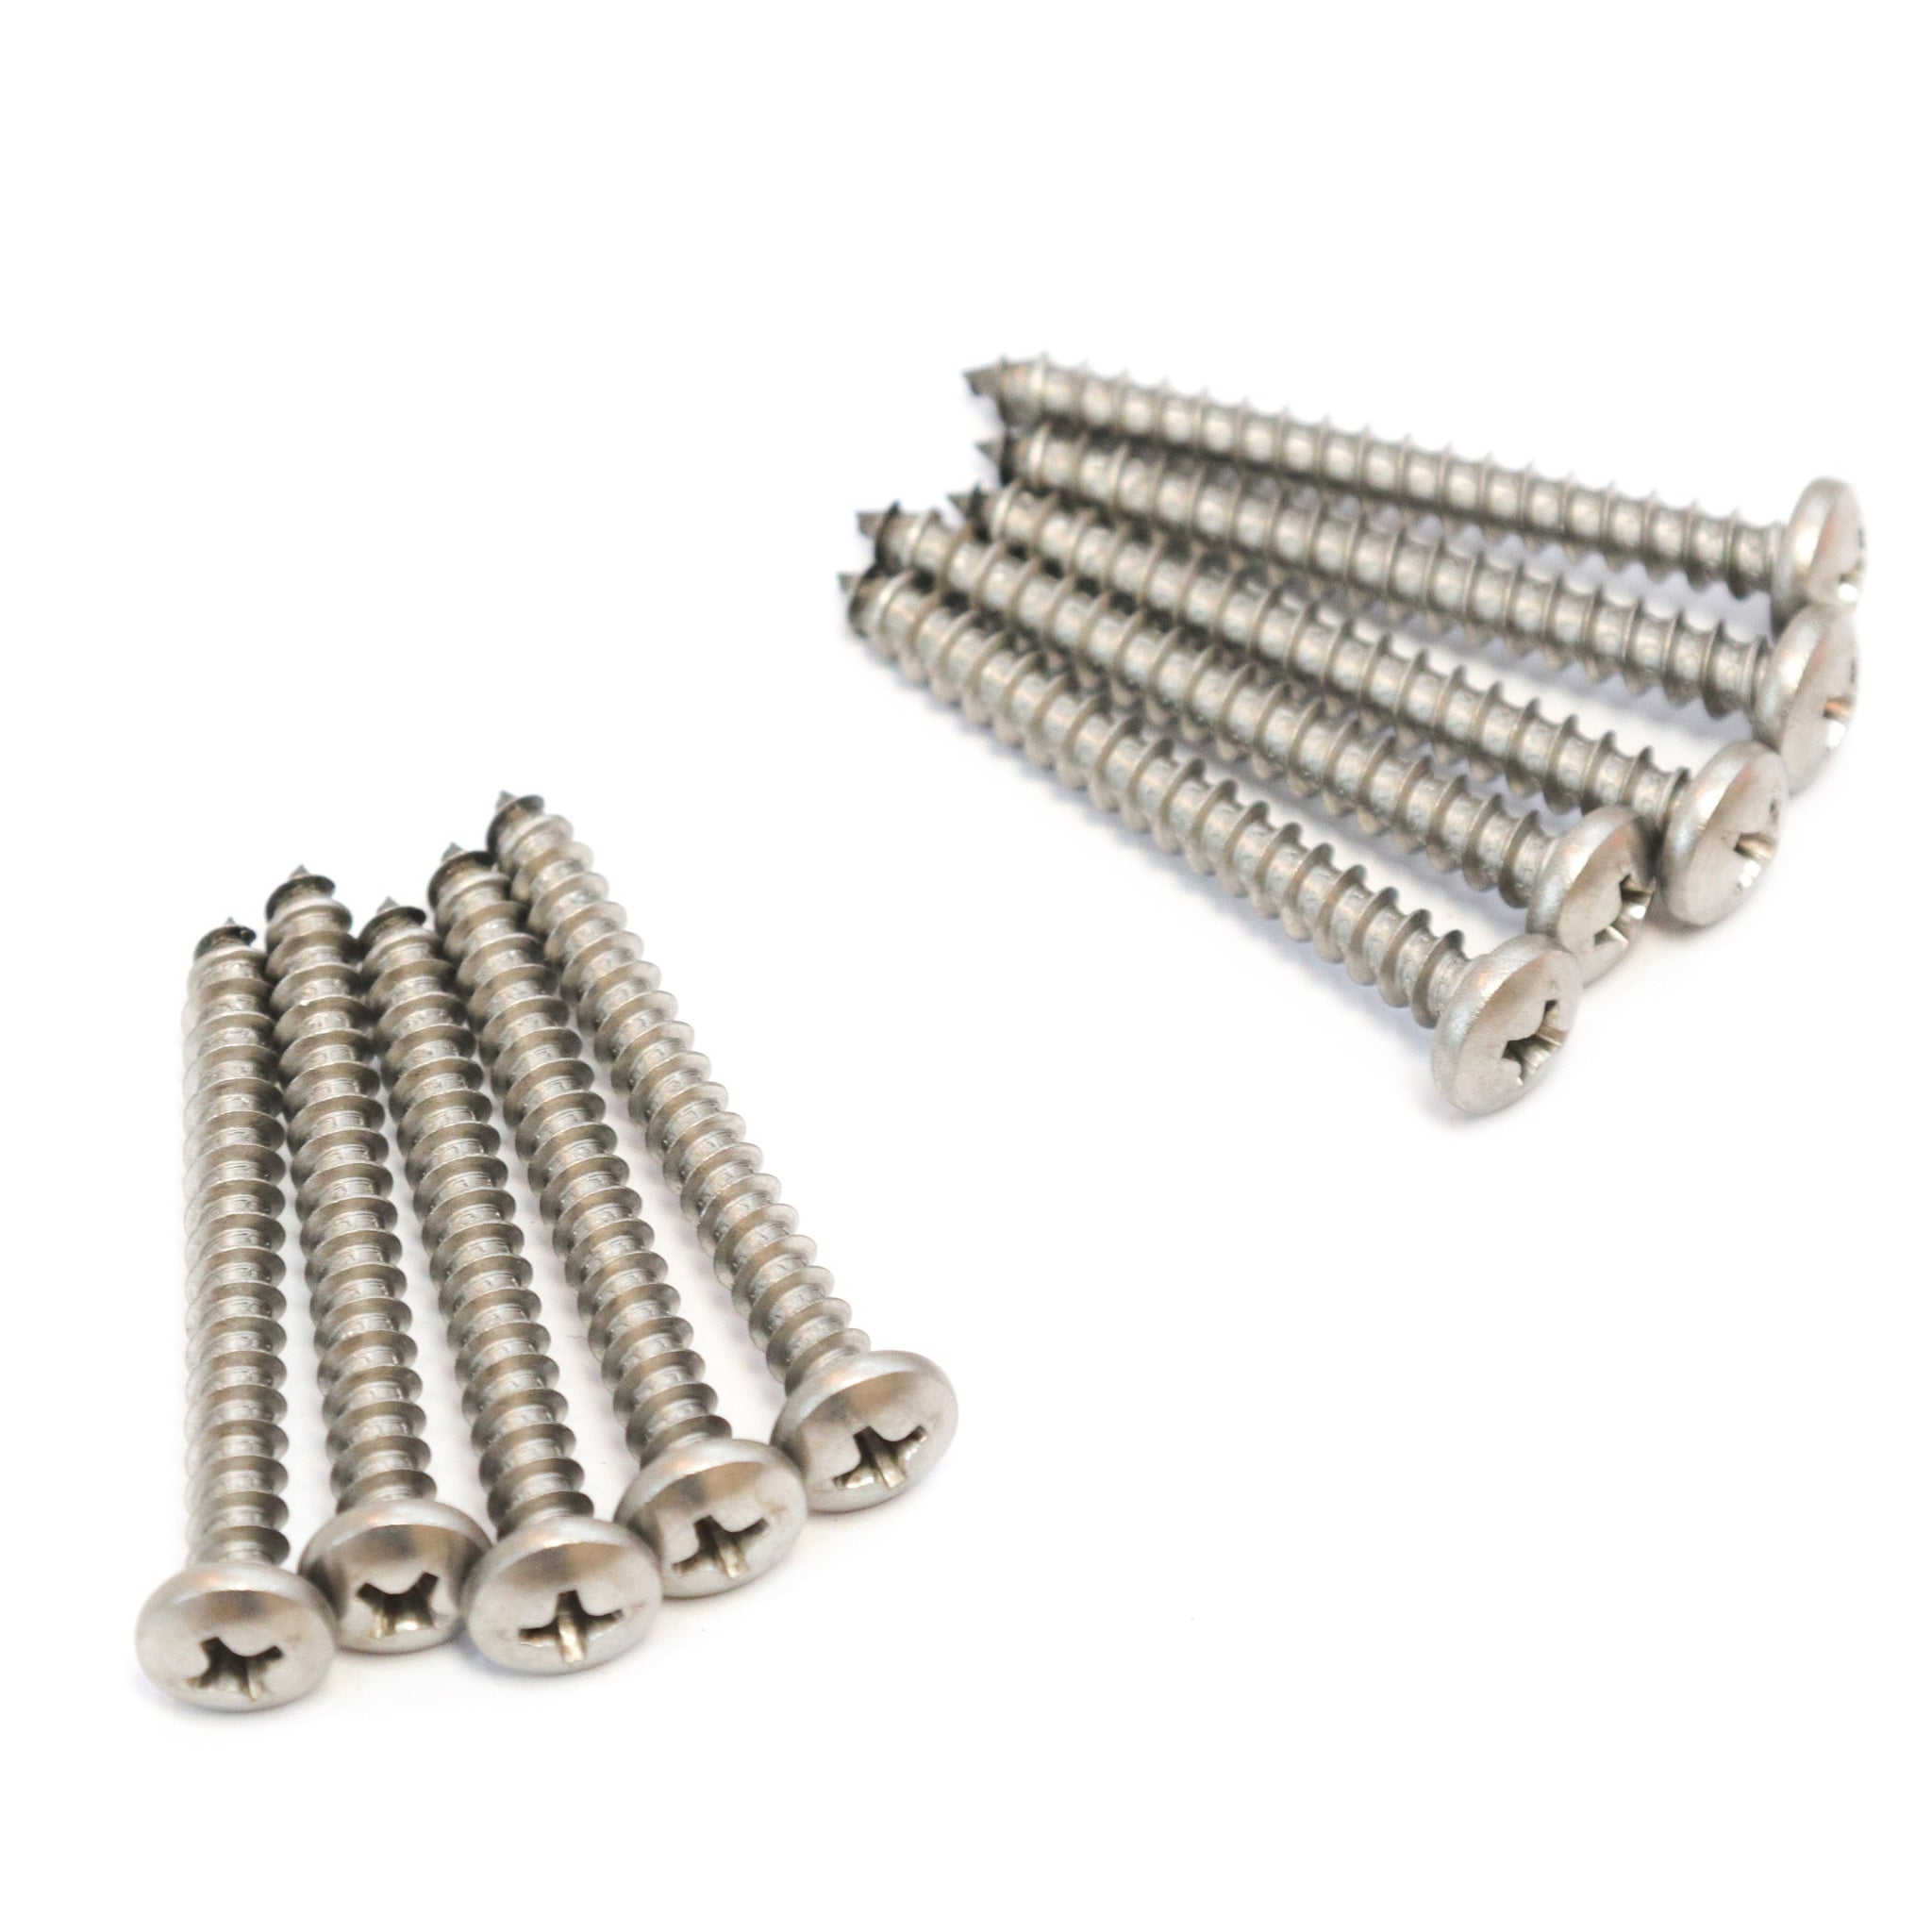 Red Hound Auto 10 Marine Pan Head Screw Set Dock Bumper Installation 10 x 1-3/4 Inches SS Stainless